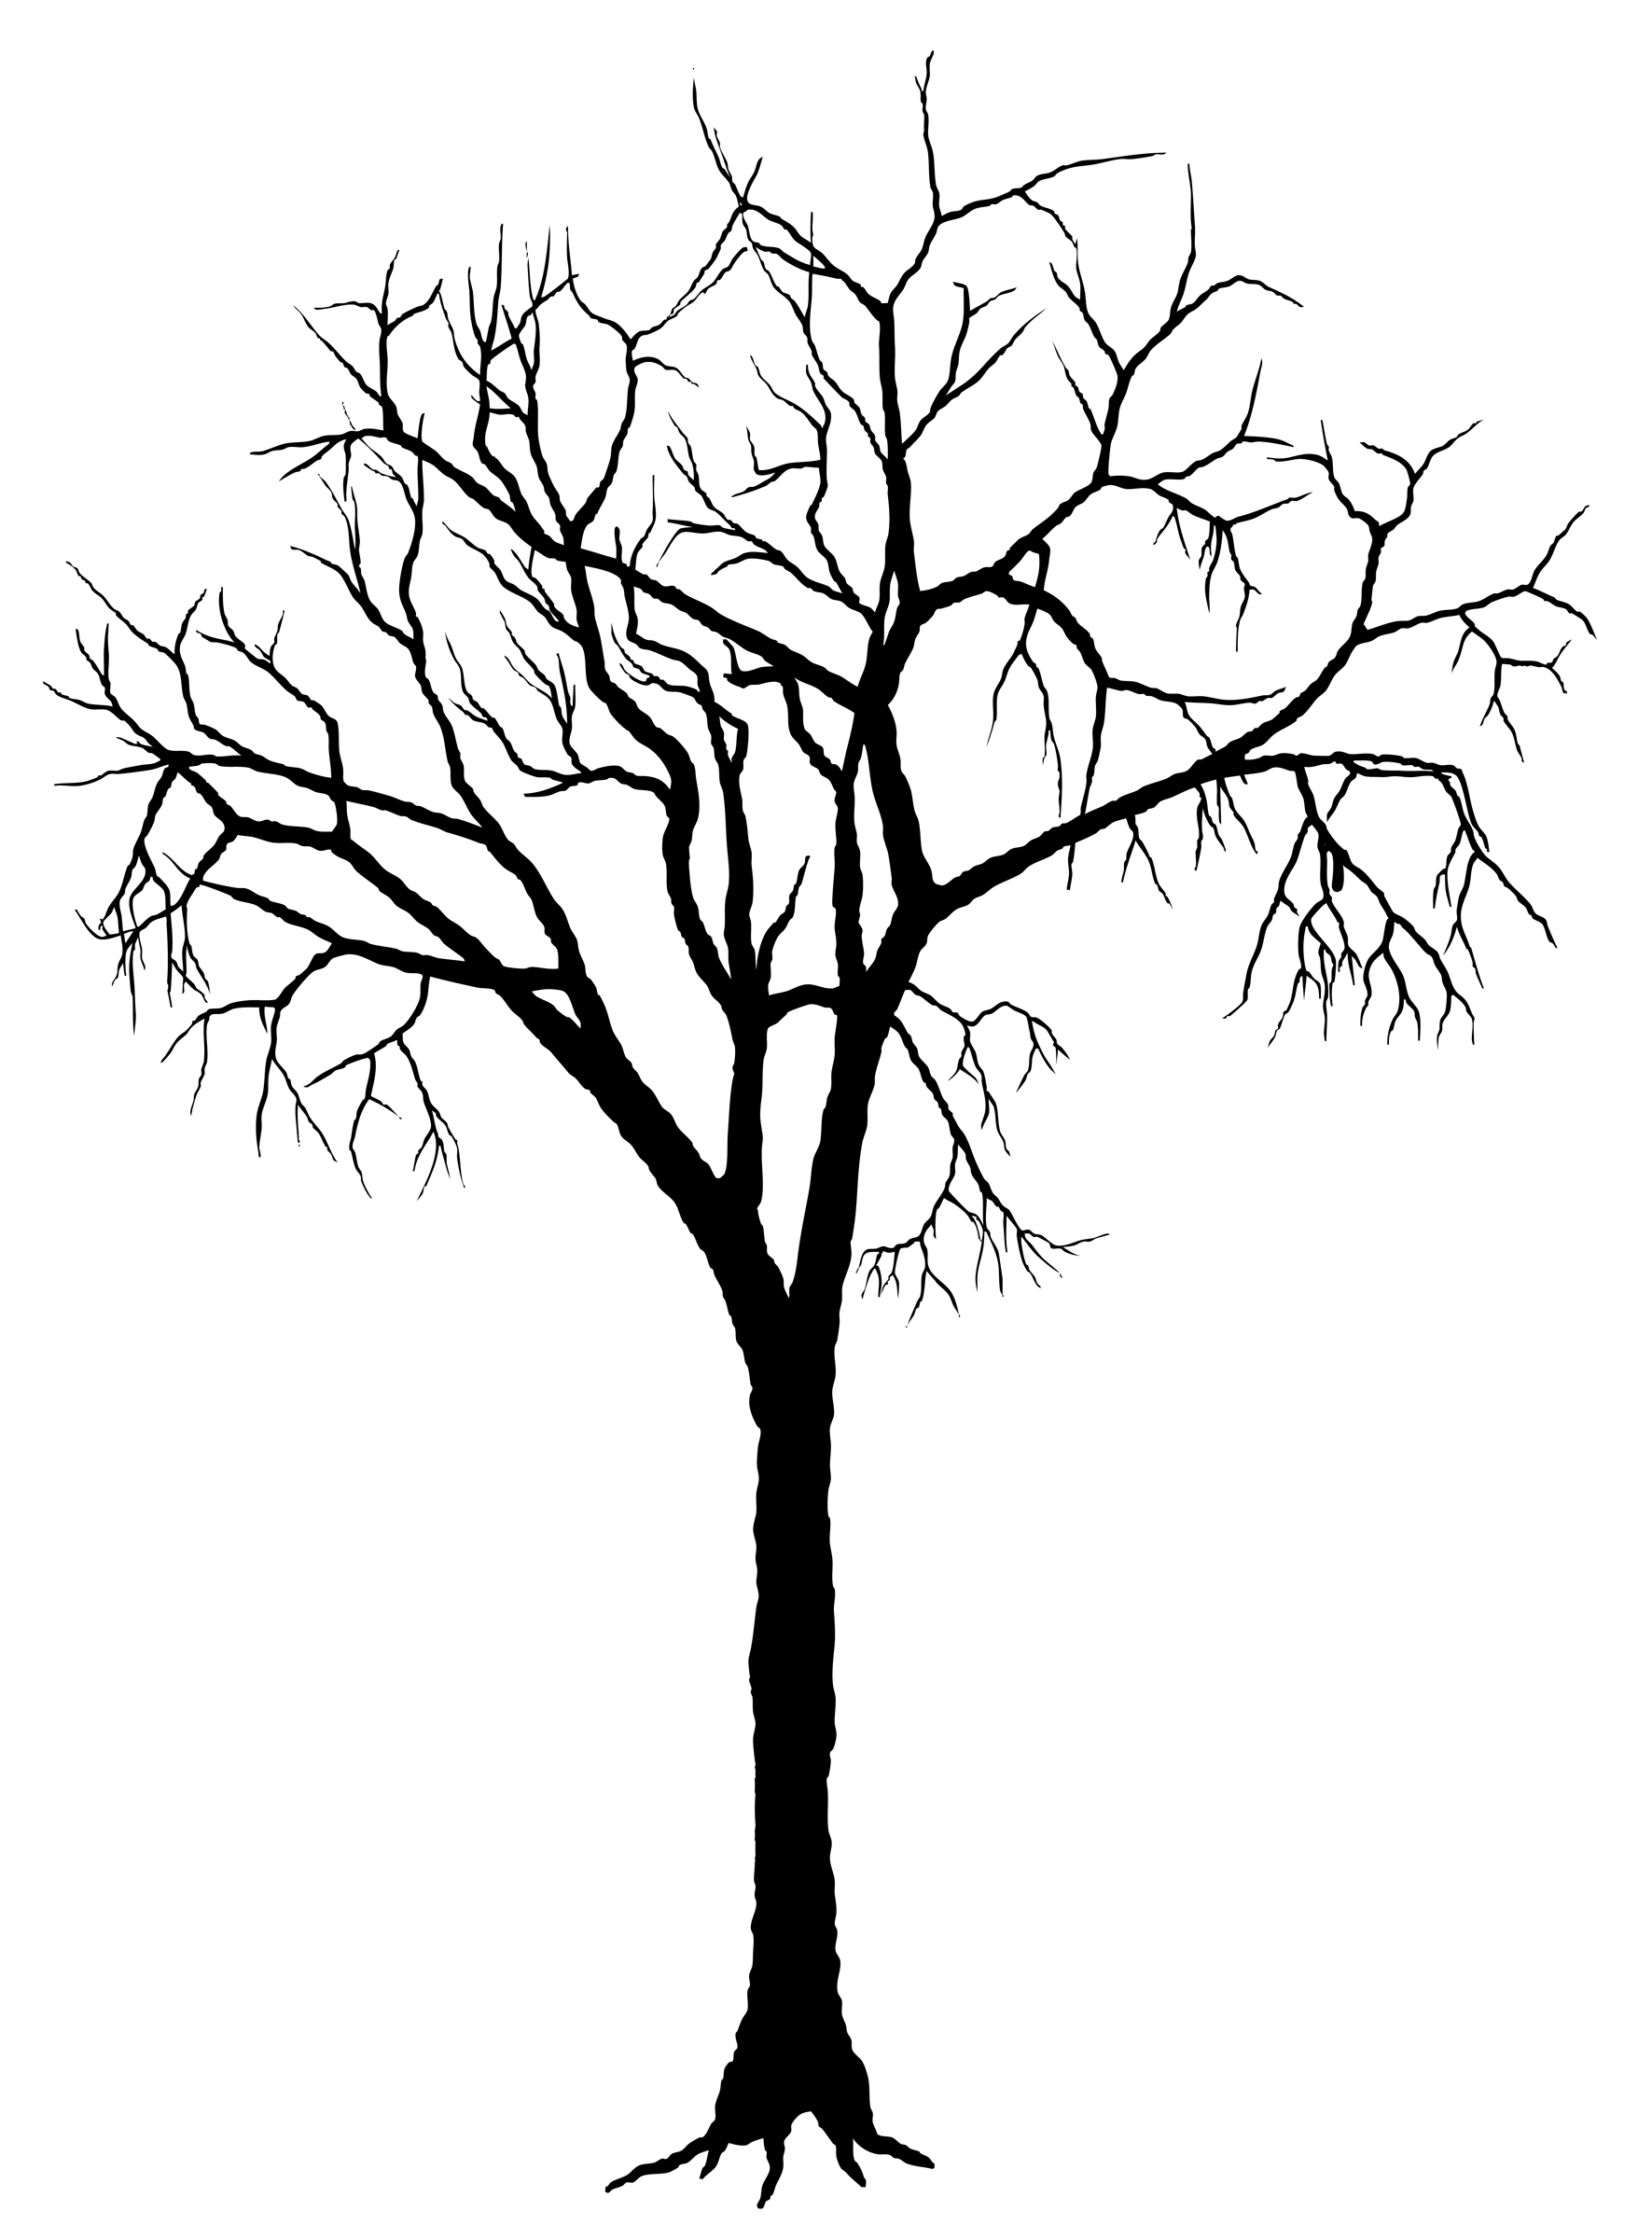 Silhouette Of Trees - ClipArt Best | wire trees | Pinterest | Tree ...